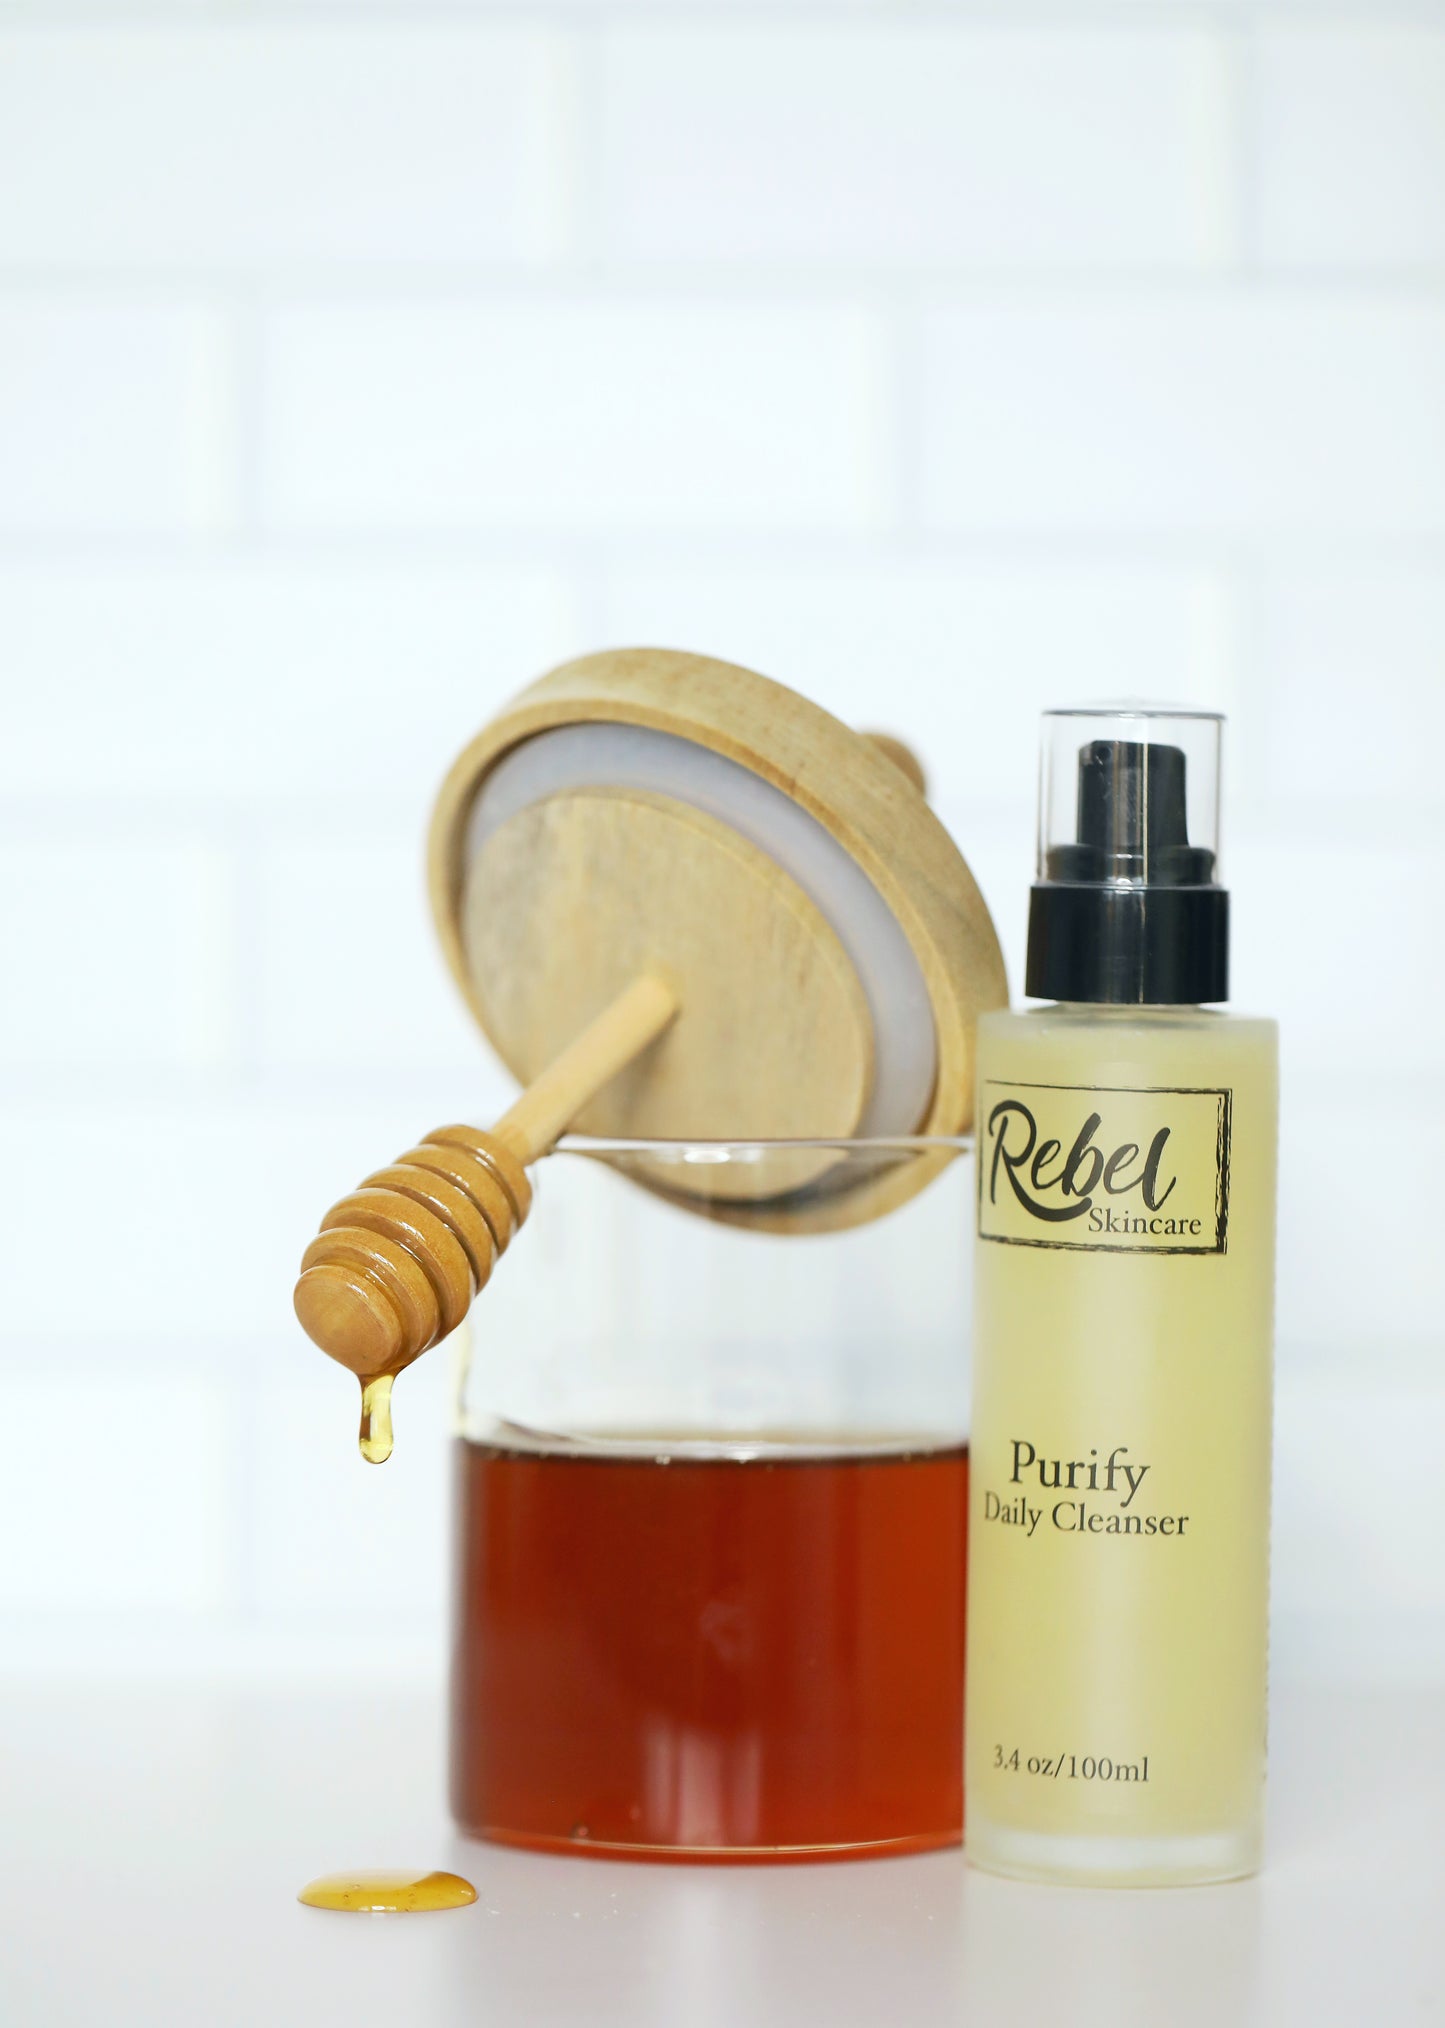 Rebel Skincare Purify Daily Cleanser